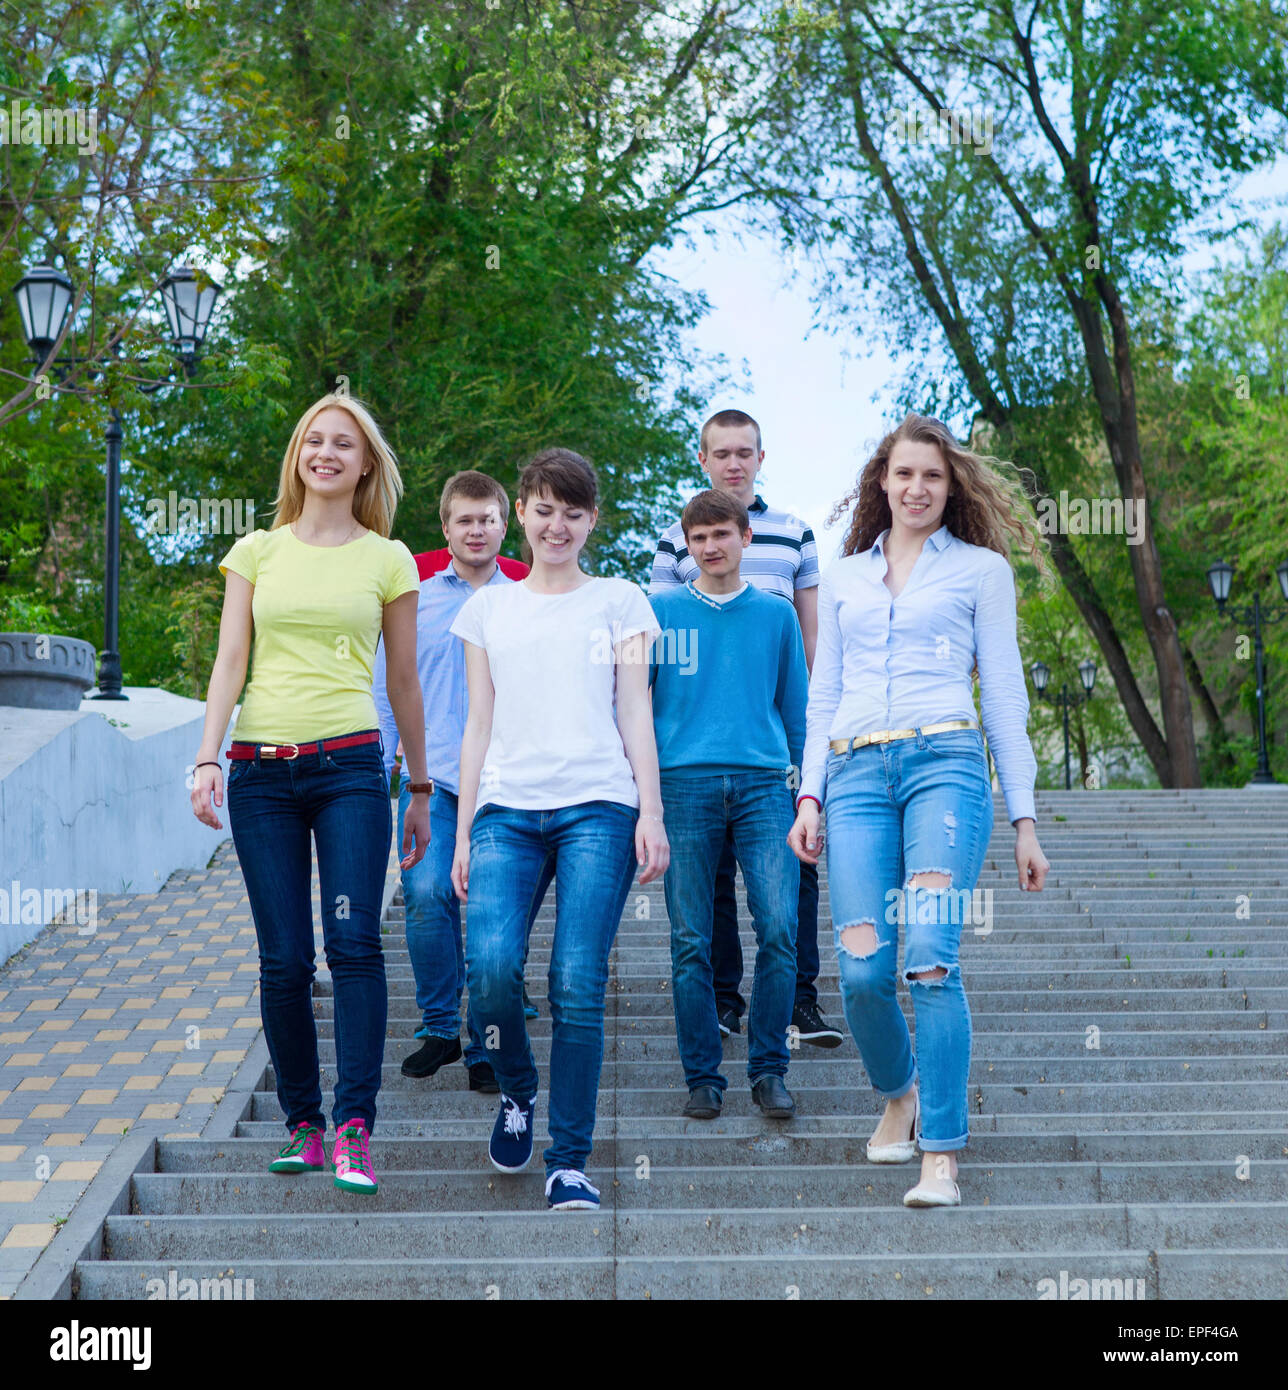 Group of smiling teenagers walking outdoors Stock Photo